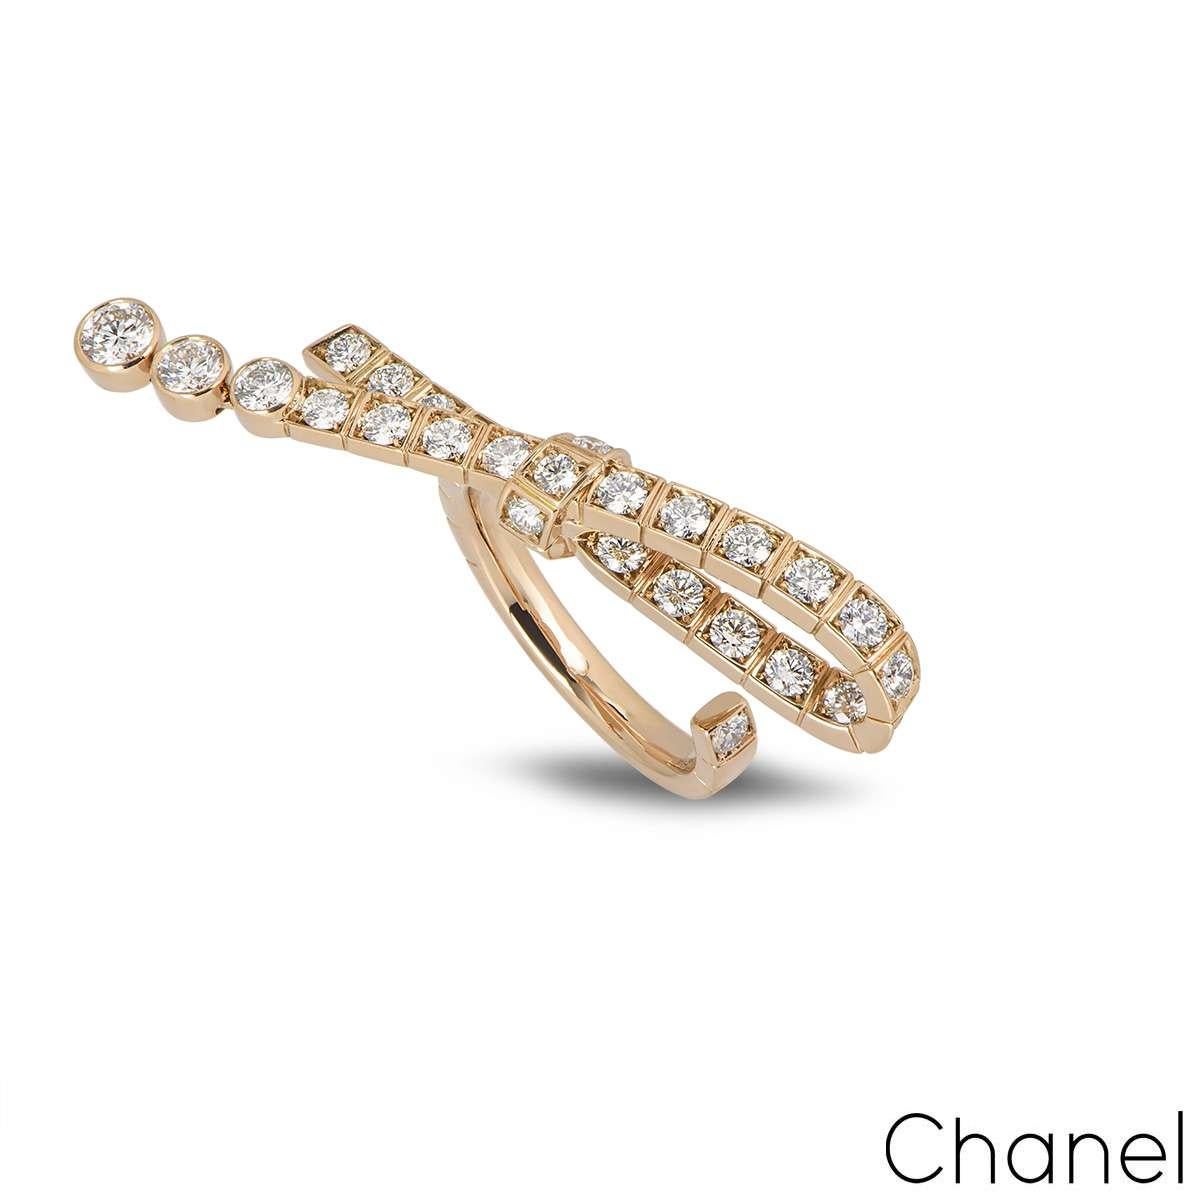 A beautiful ring from the Ruban collection by Chanel. The ring features an articulated bow motif, set with 33 round brilliant cut diamonds with a total weight of 1.36ct, F-G colour and VVS1 clarity. The ring is open at one end and is a size UK K -